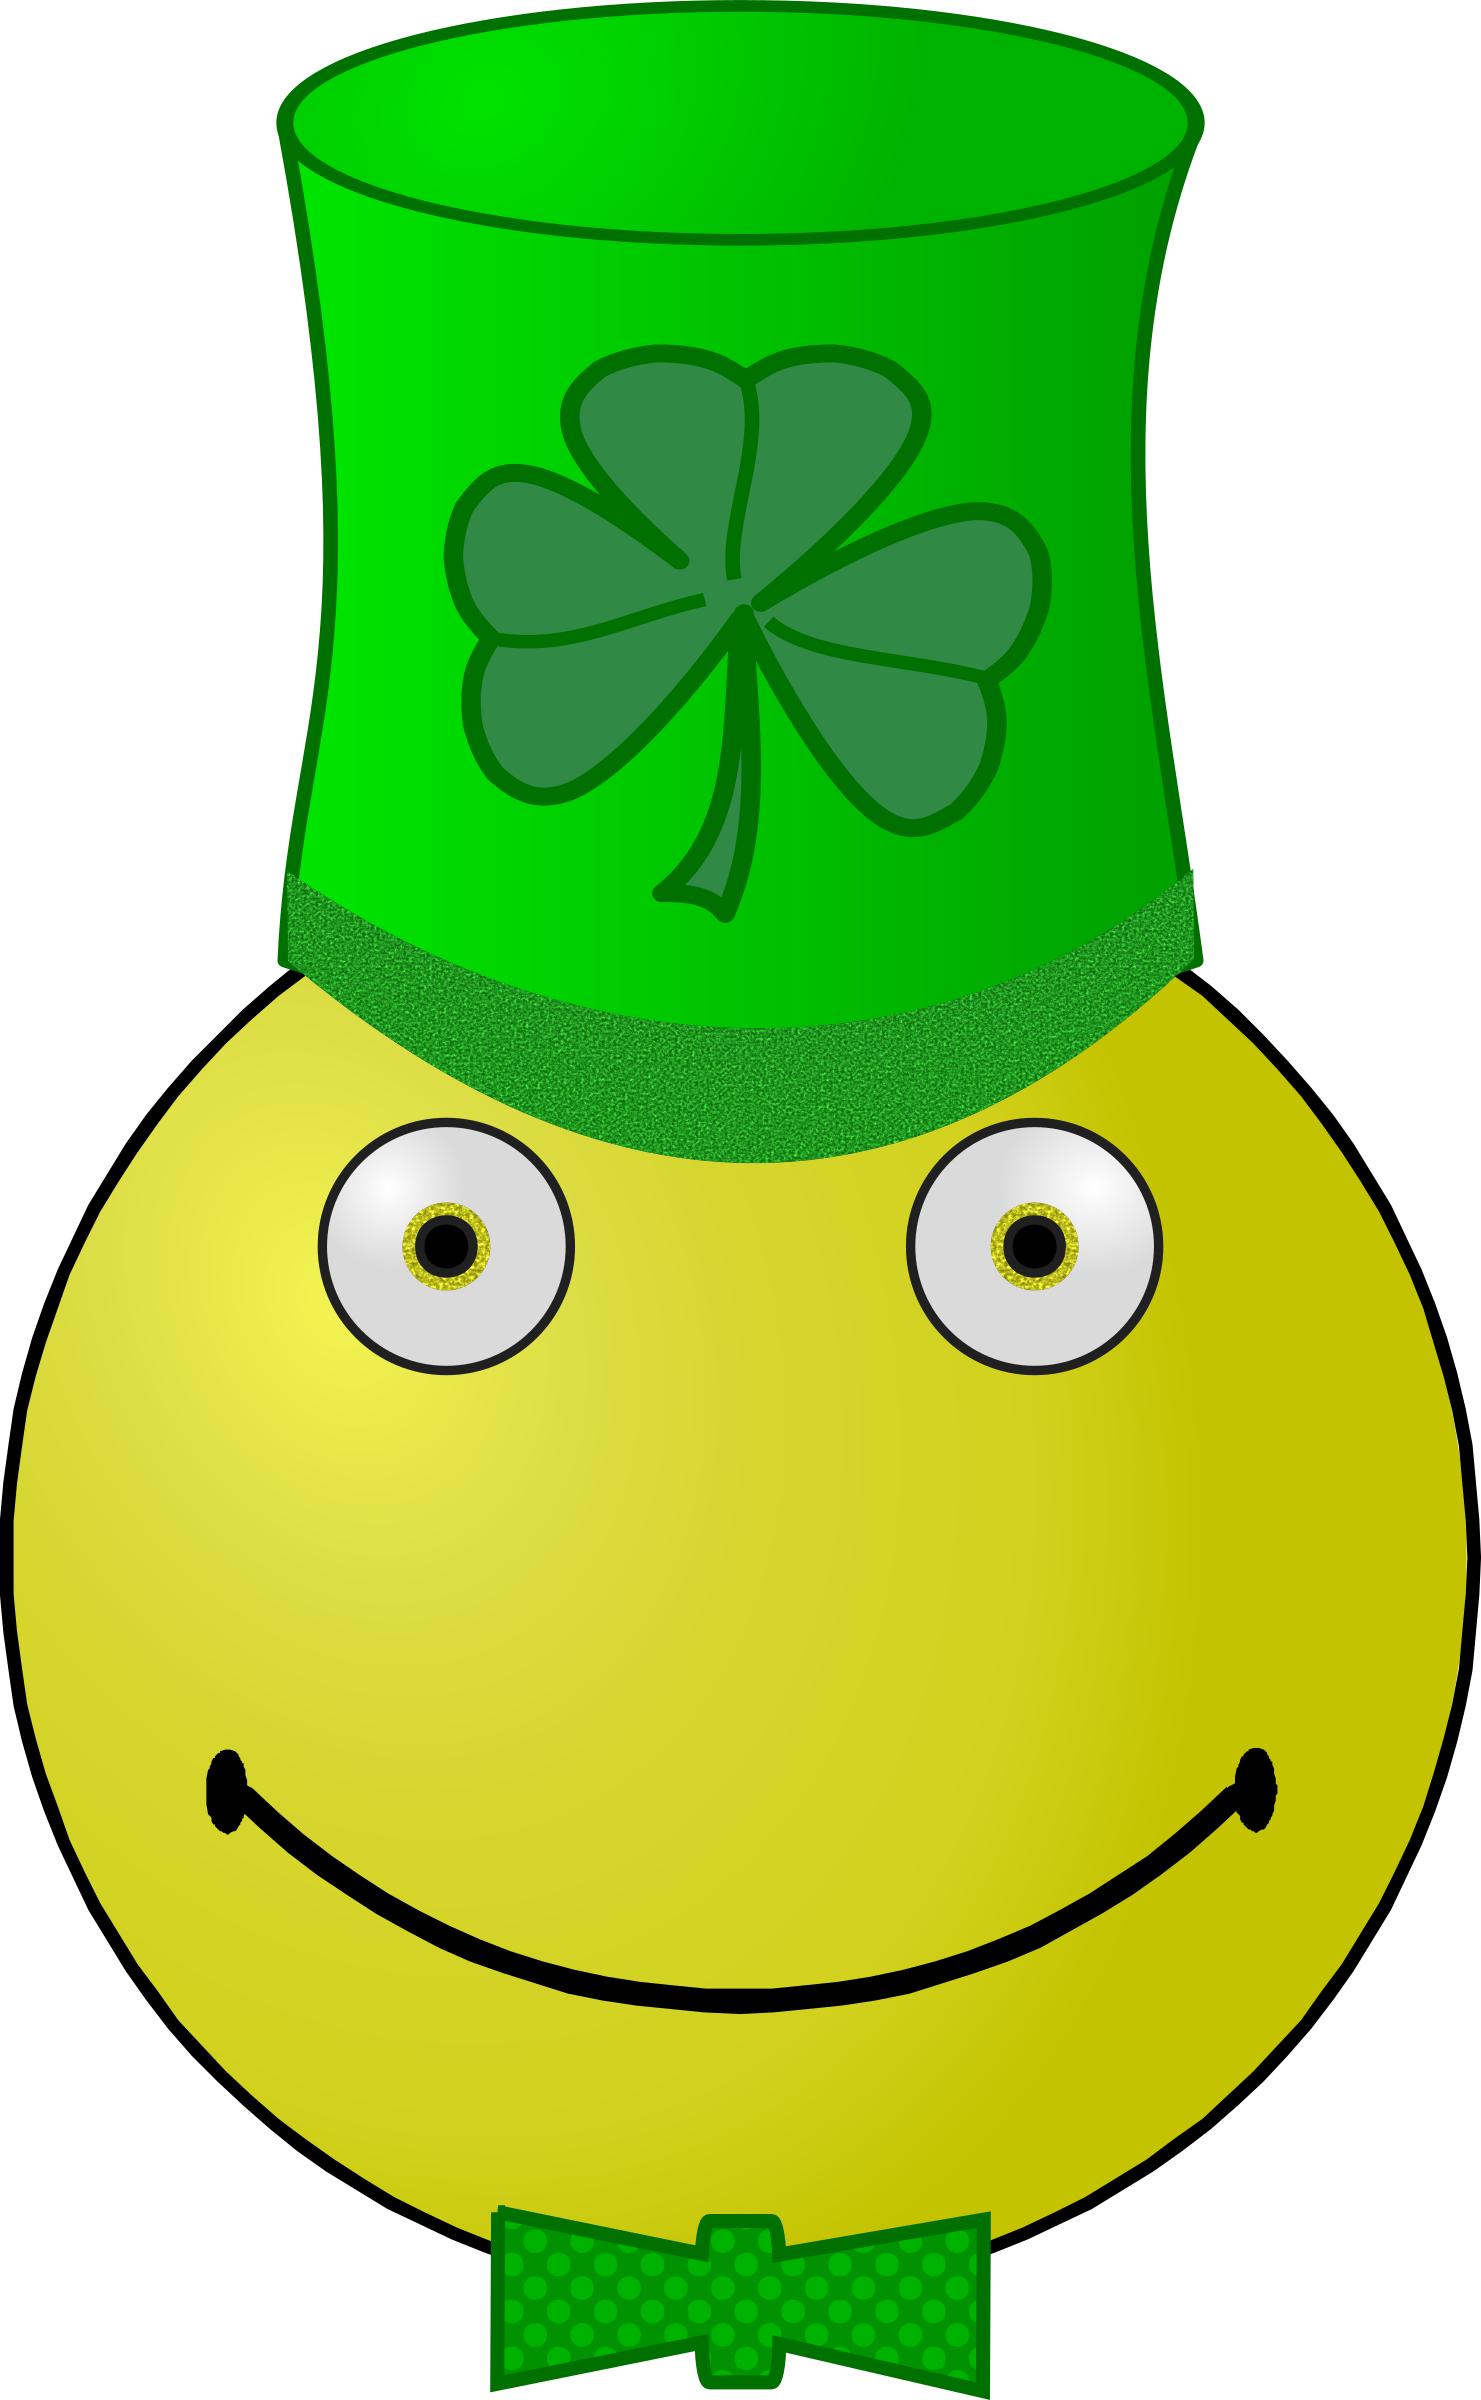 St. Patrick's Day smiley png